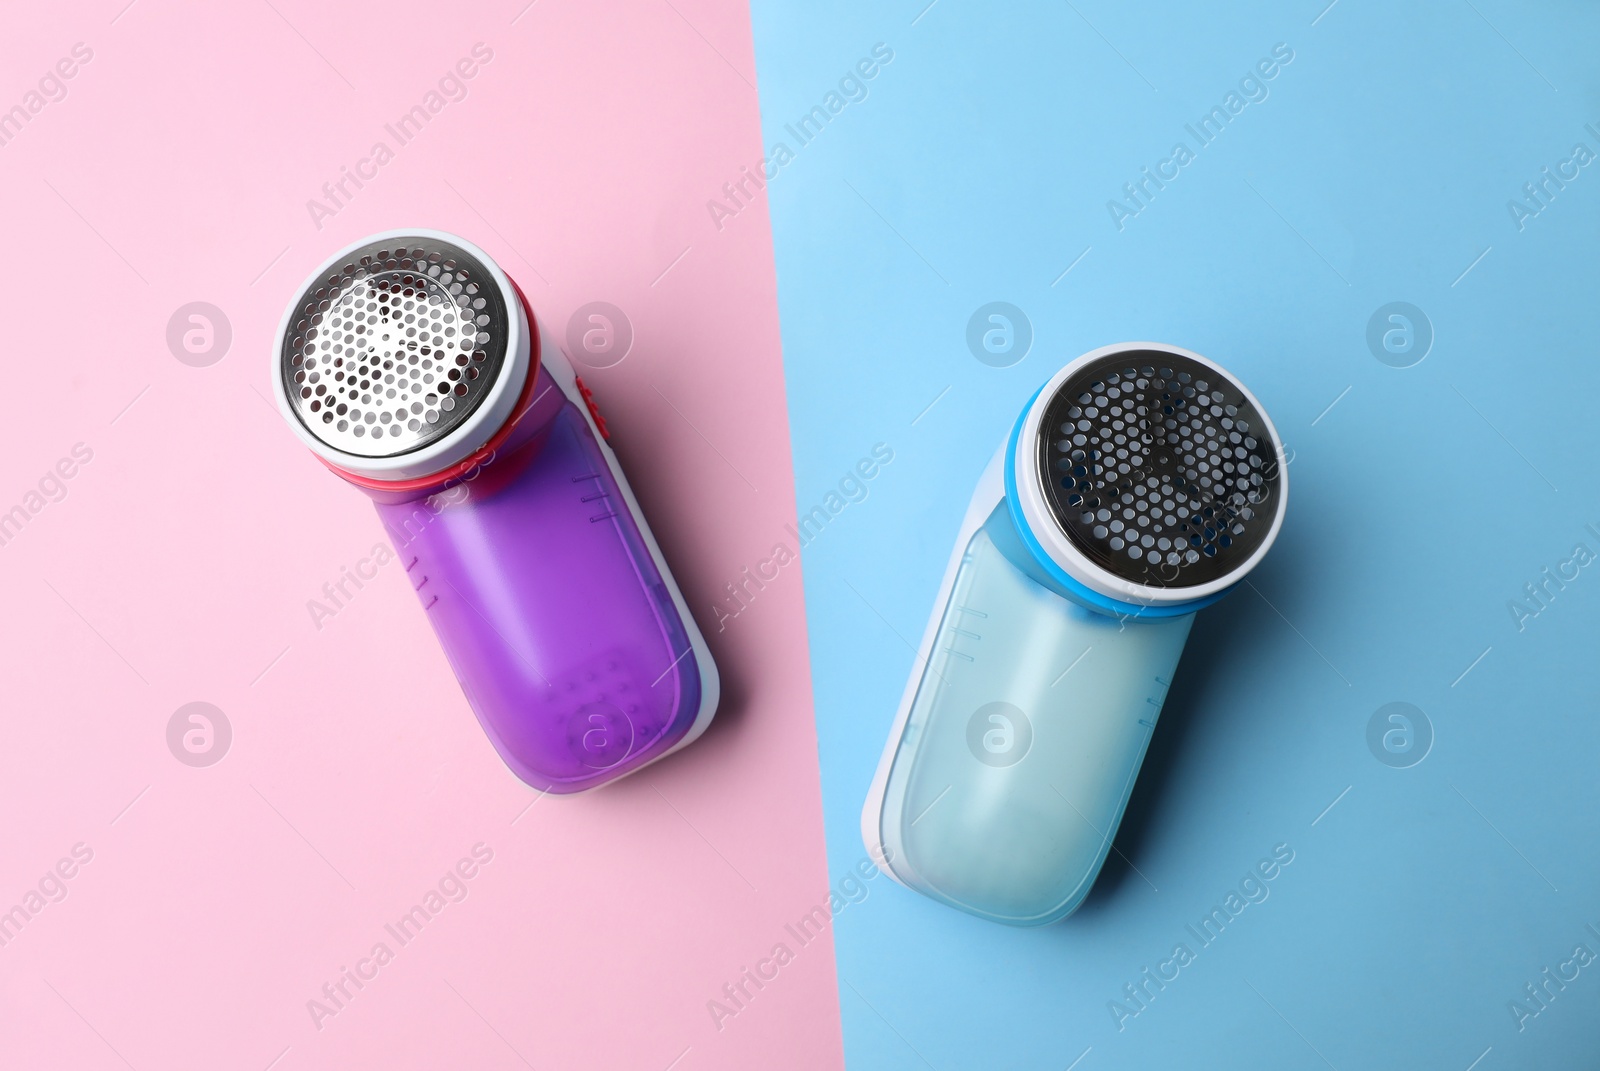 Photo of Modern fabric shavers on color background, flat lay